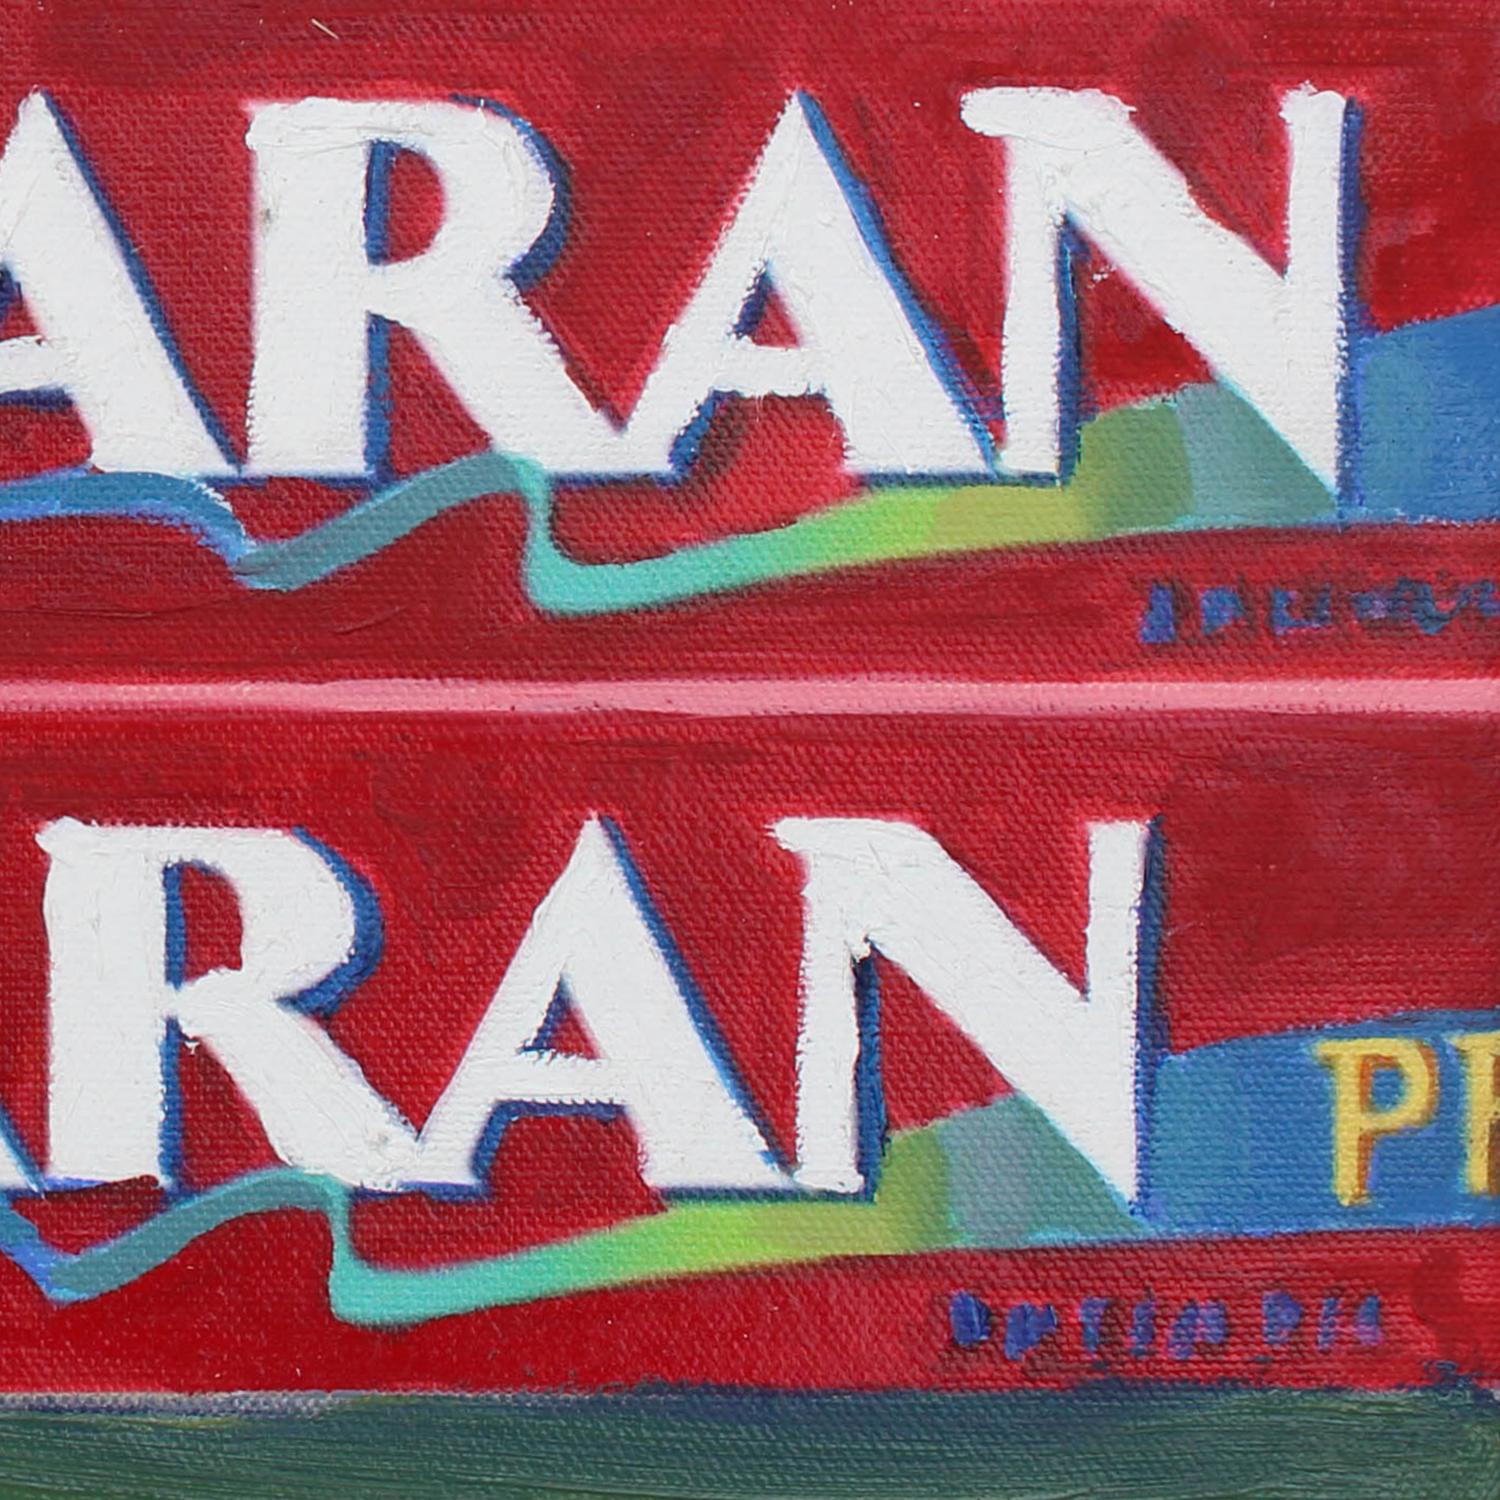 Saran - Painting by Brendan O'Connell